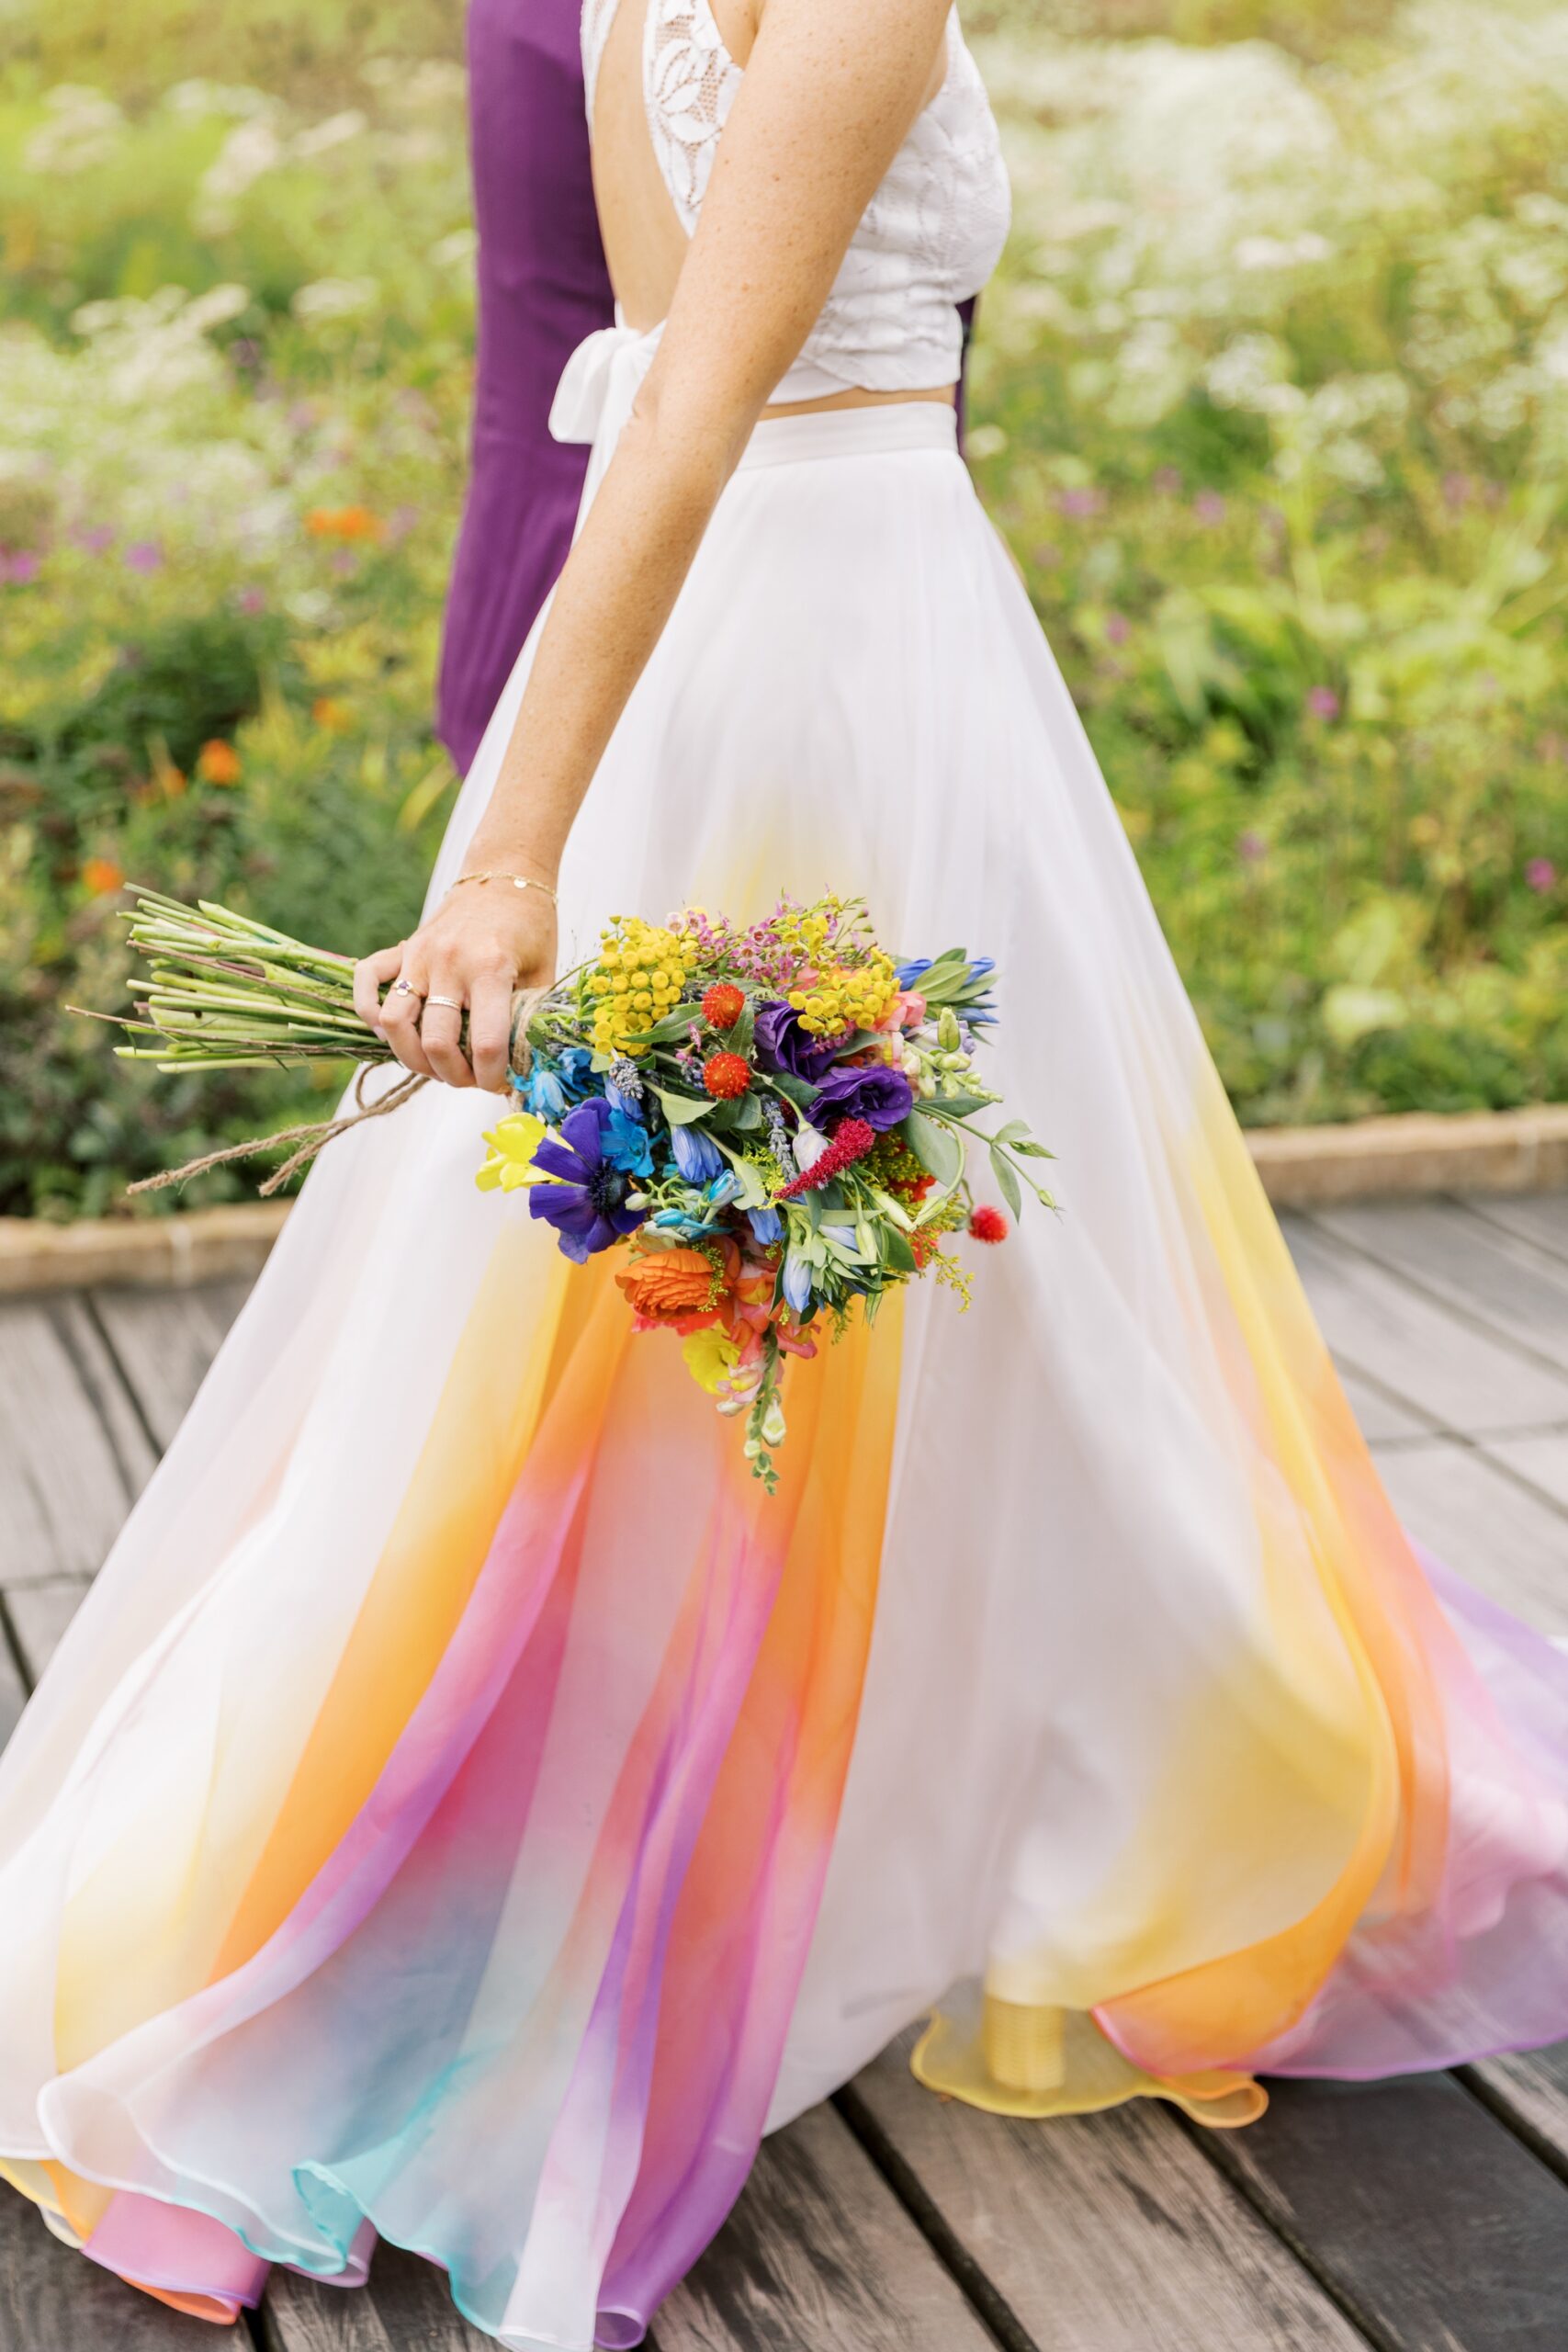 A colorful wedding bouquet for a colorful wedding palette